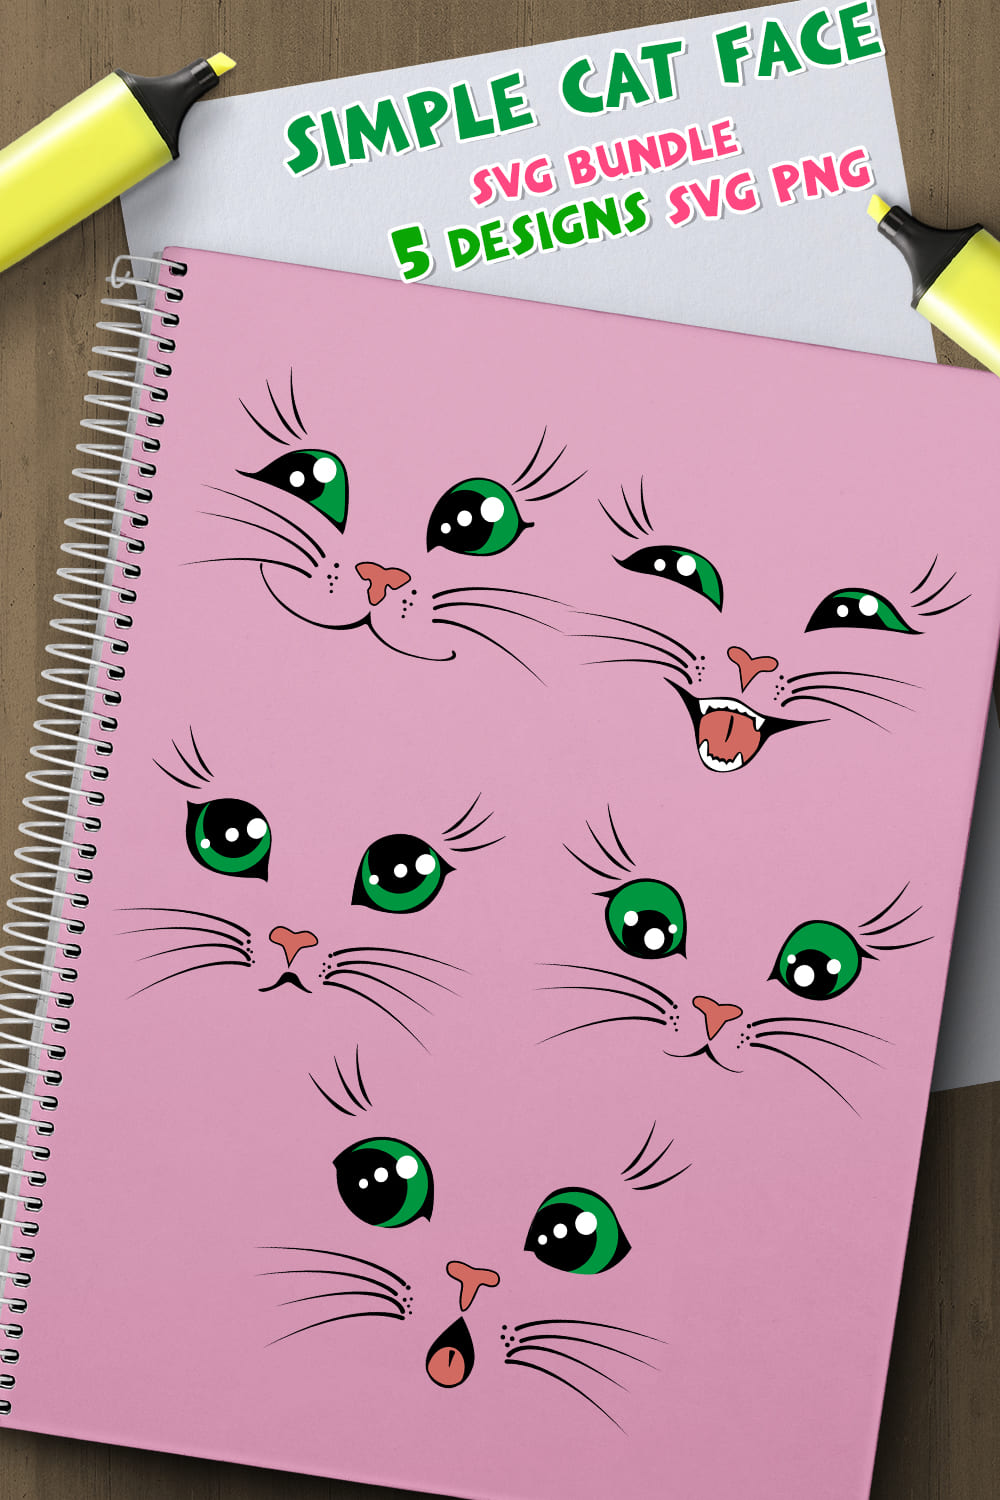 Cute cat eyes on a pink background.